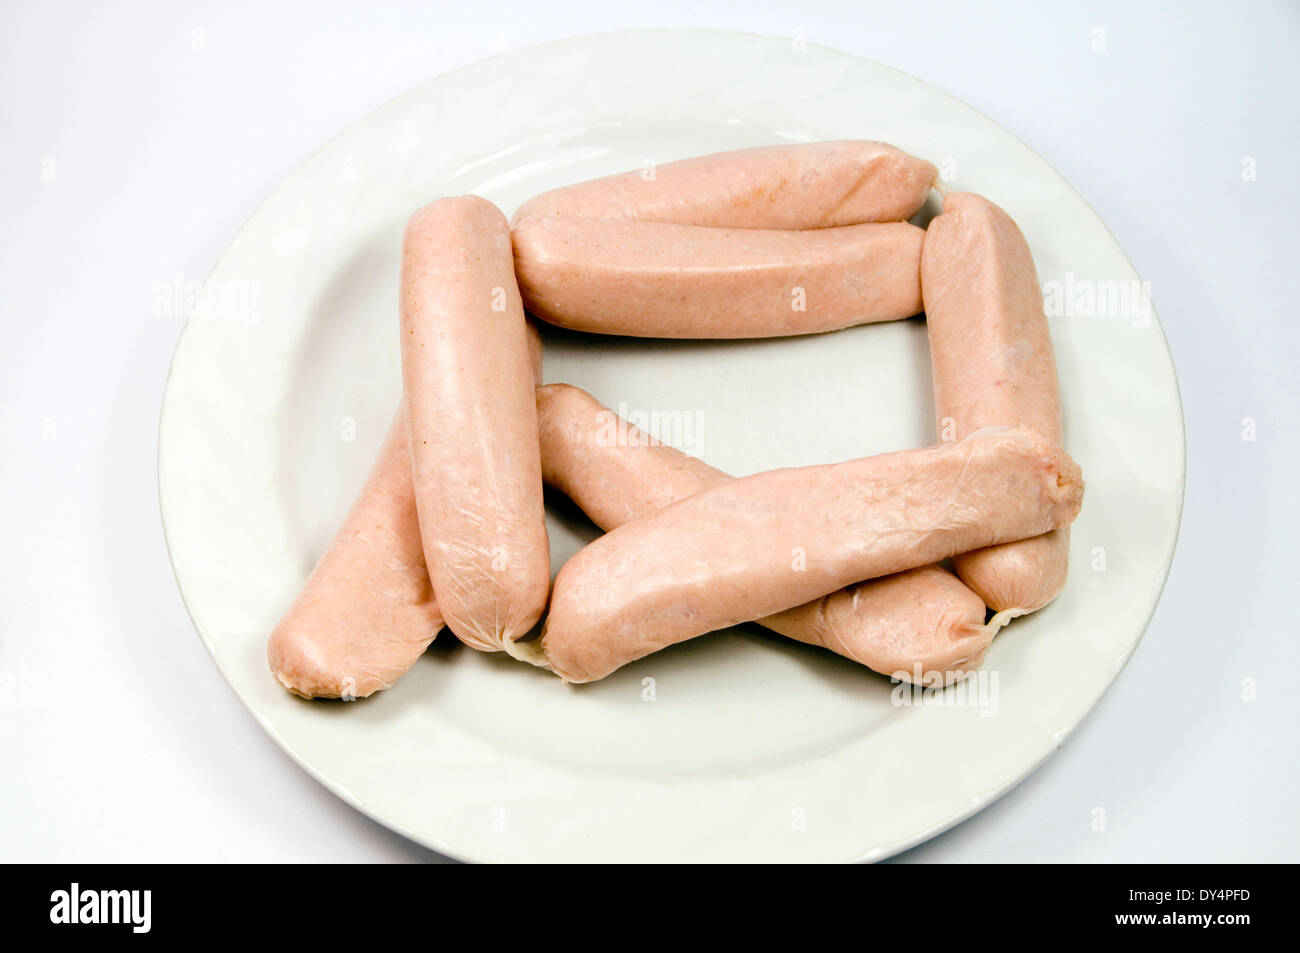 String of sausages Stock Photo